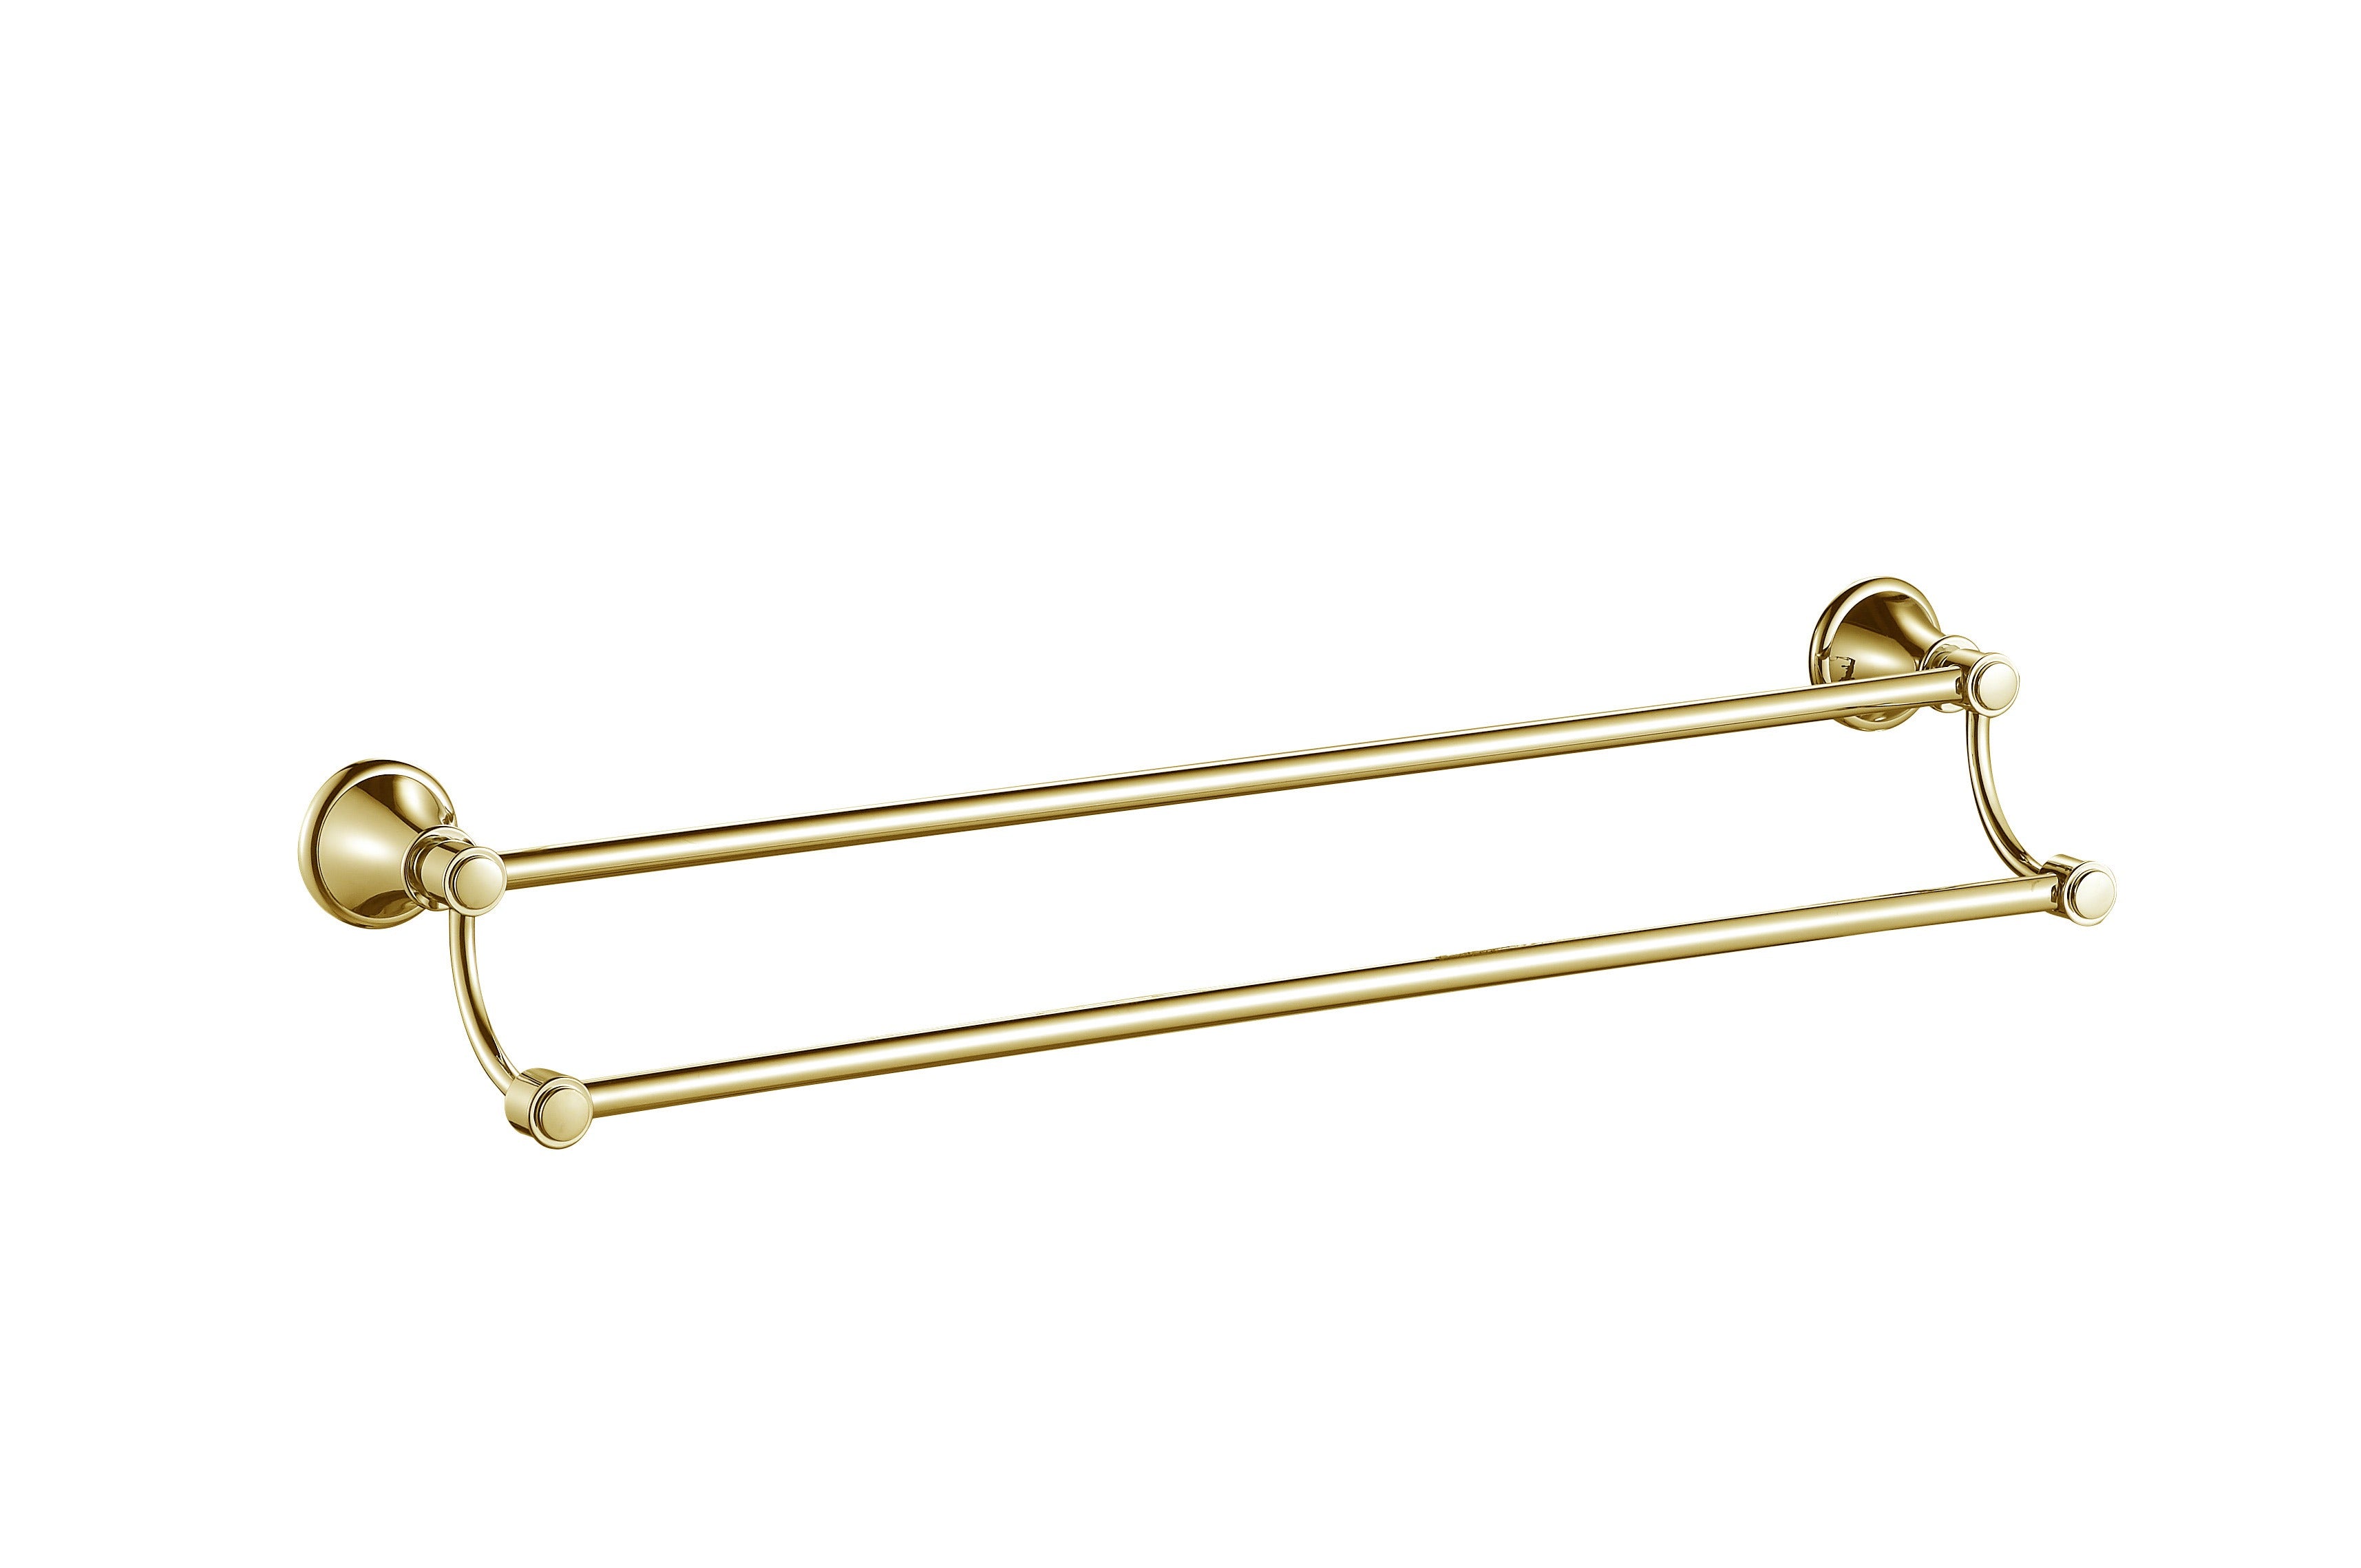 IKON CLASICO NON-HEATED DOUBLE TOWEL RAIL BRUSHED GOLD 800MM